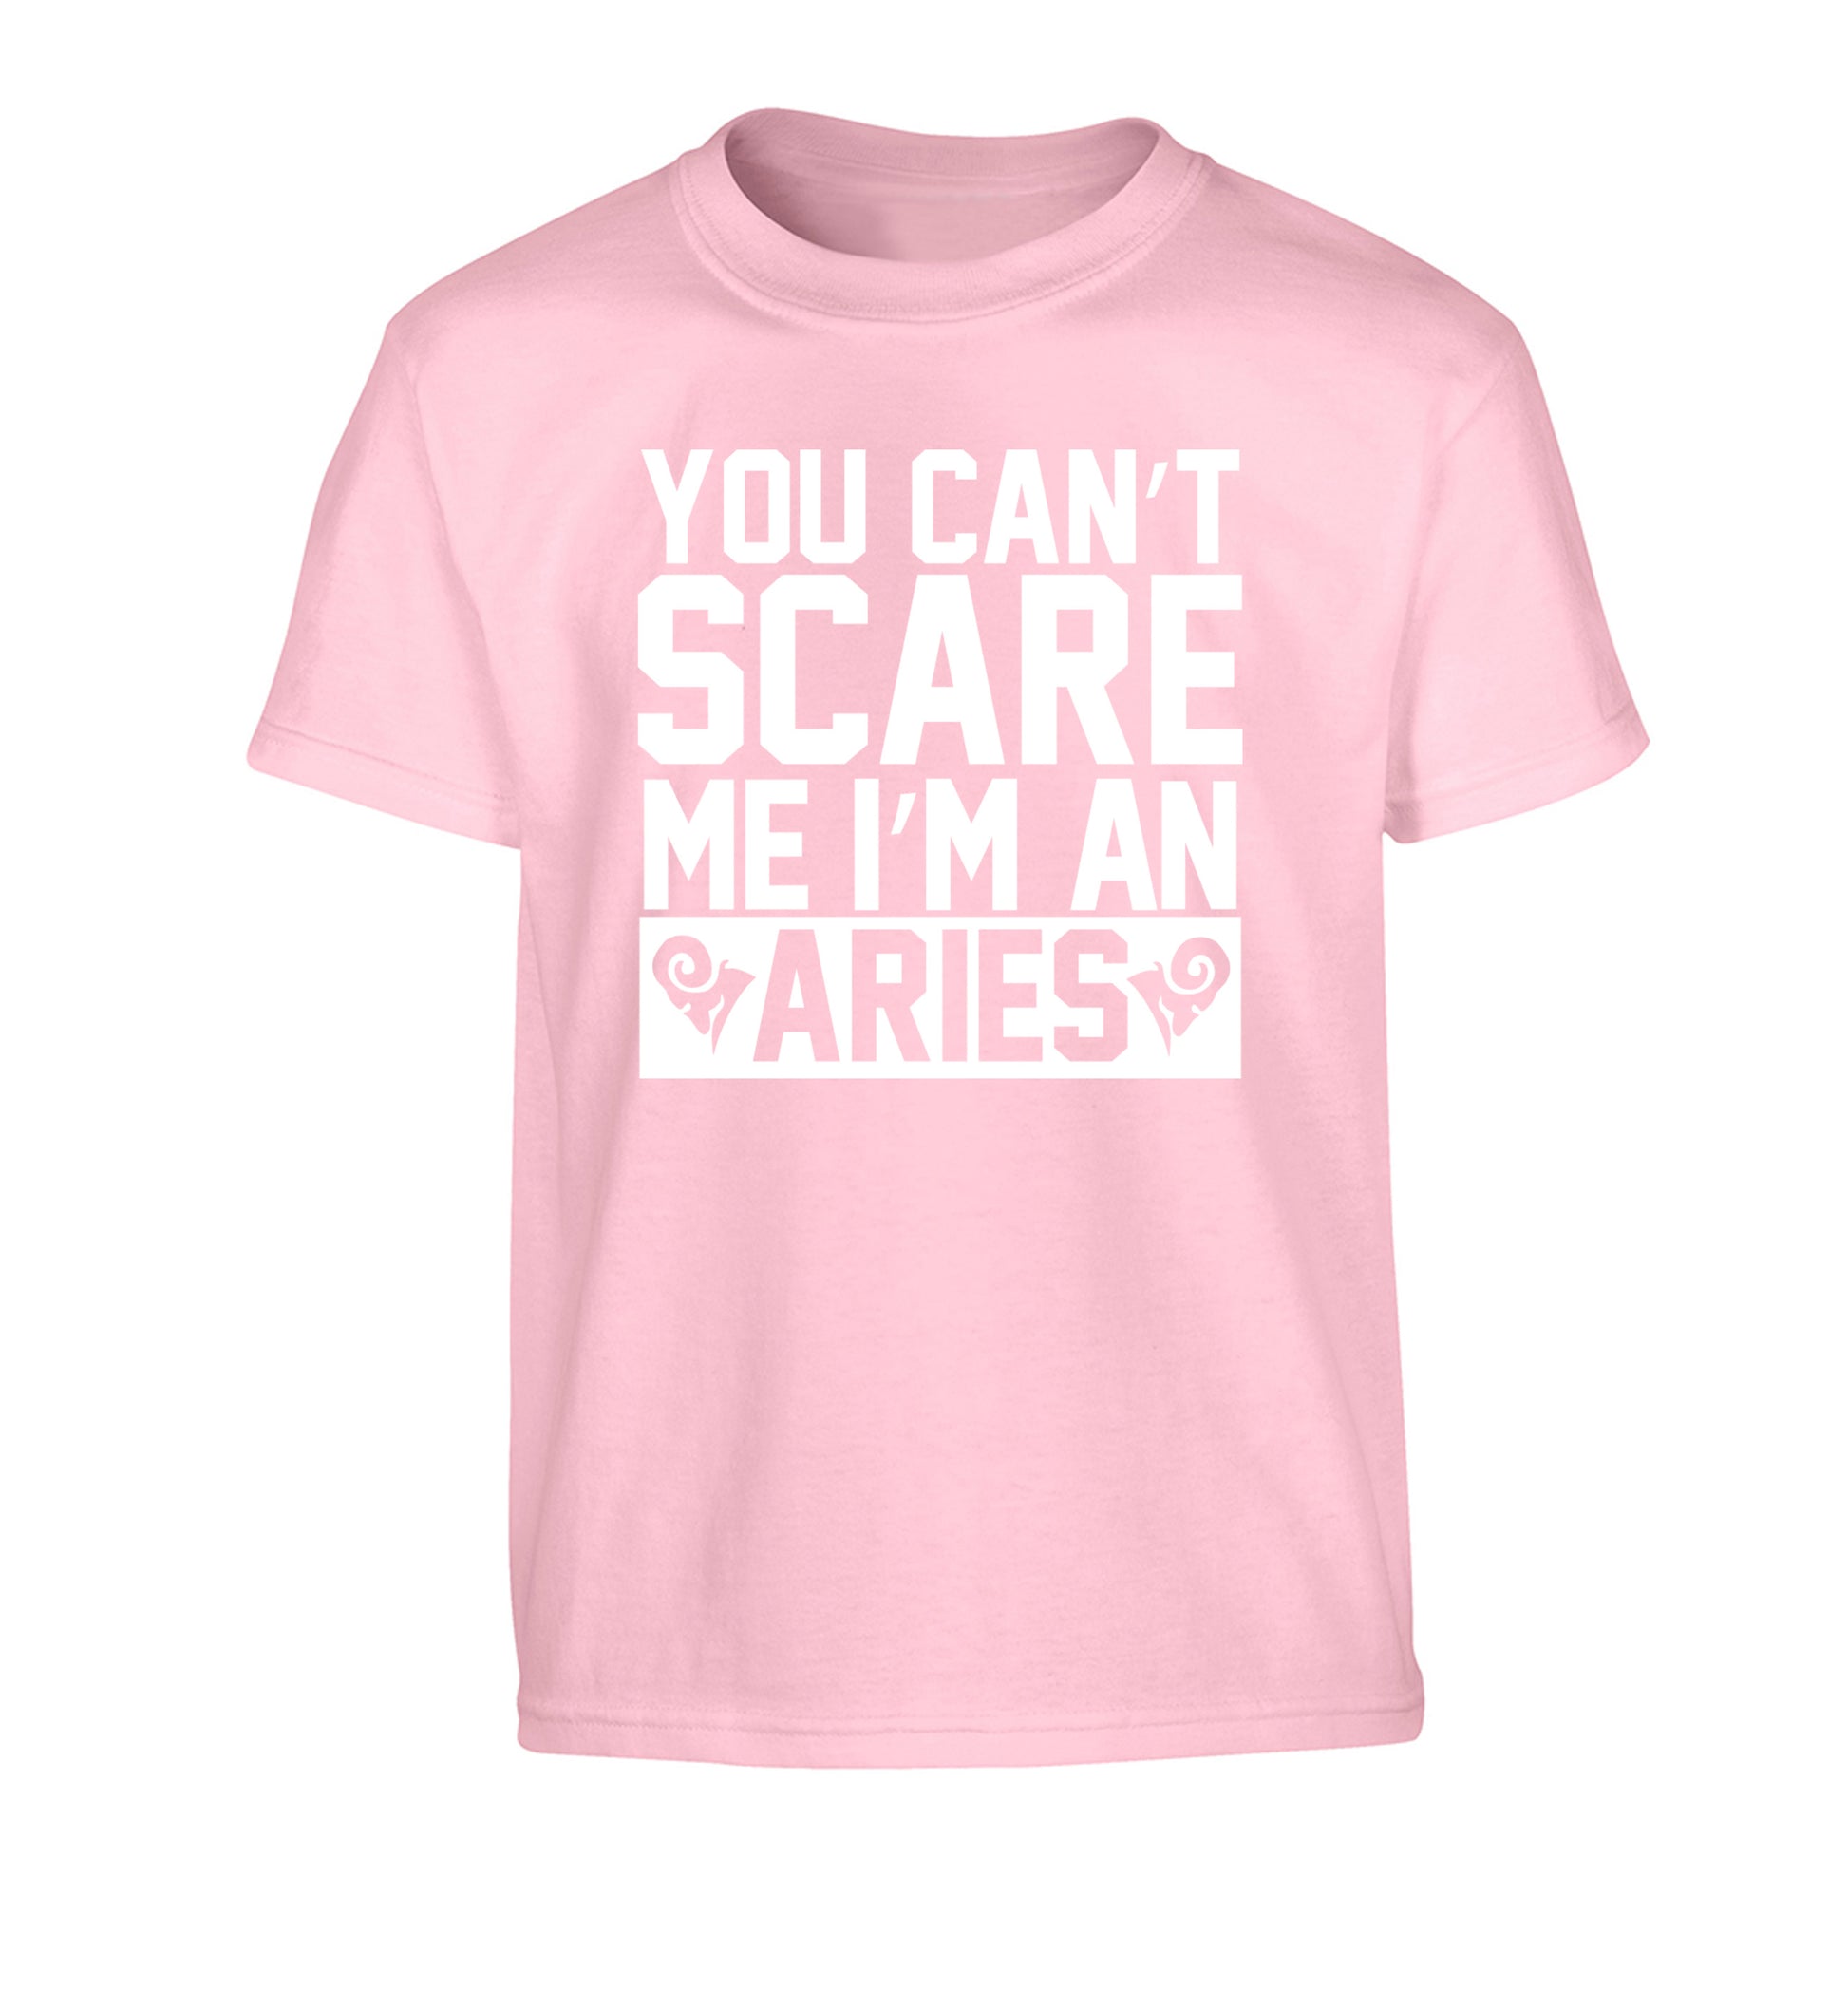 You can't scare me I'm an aries Children's light pink Tshirt 12-13 Years